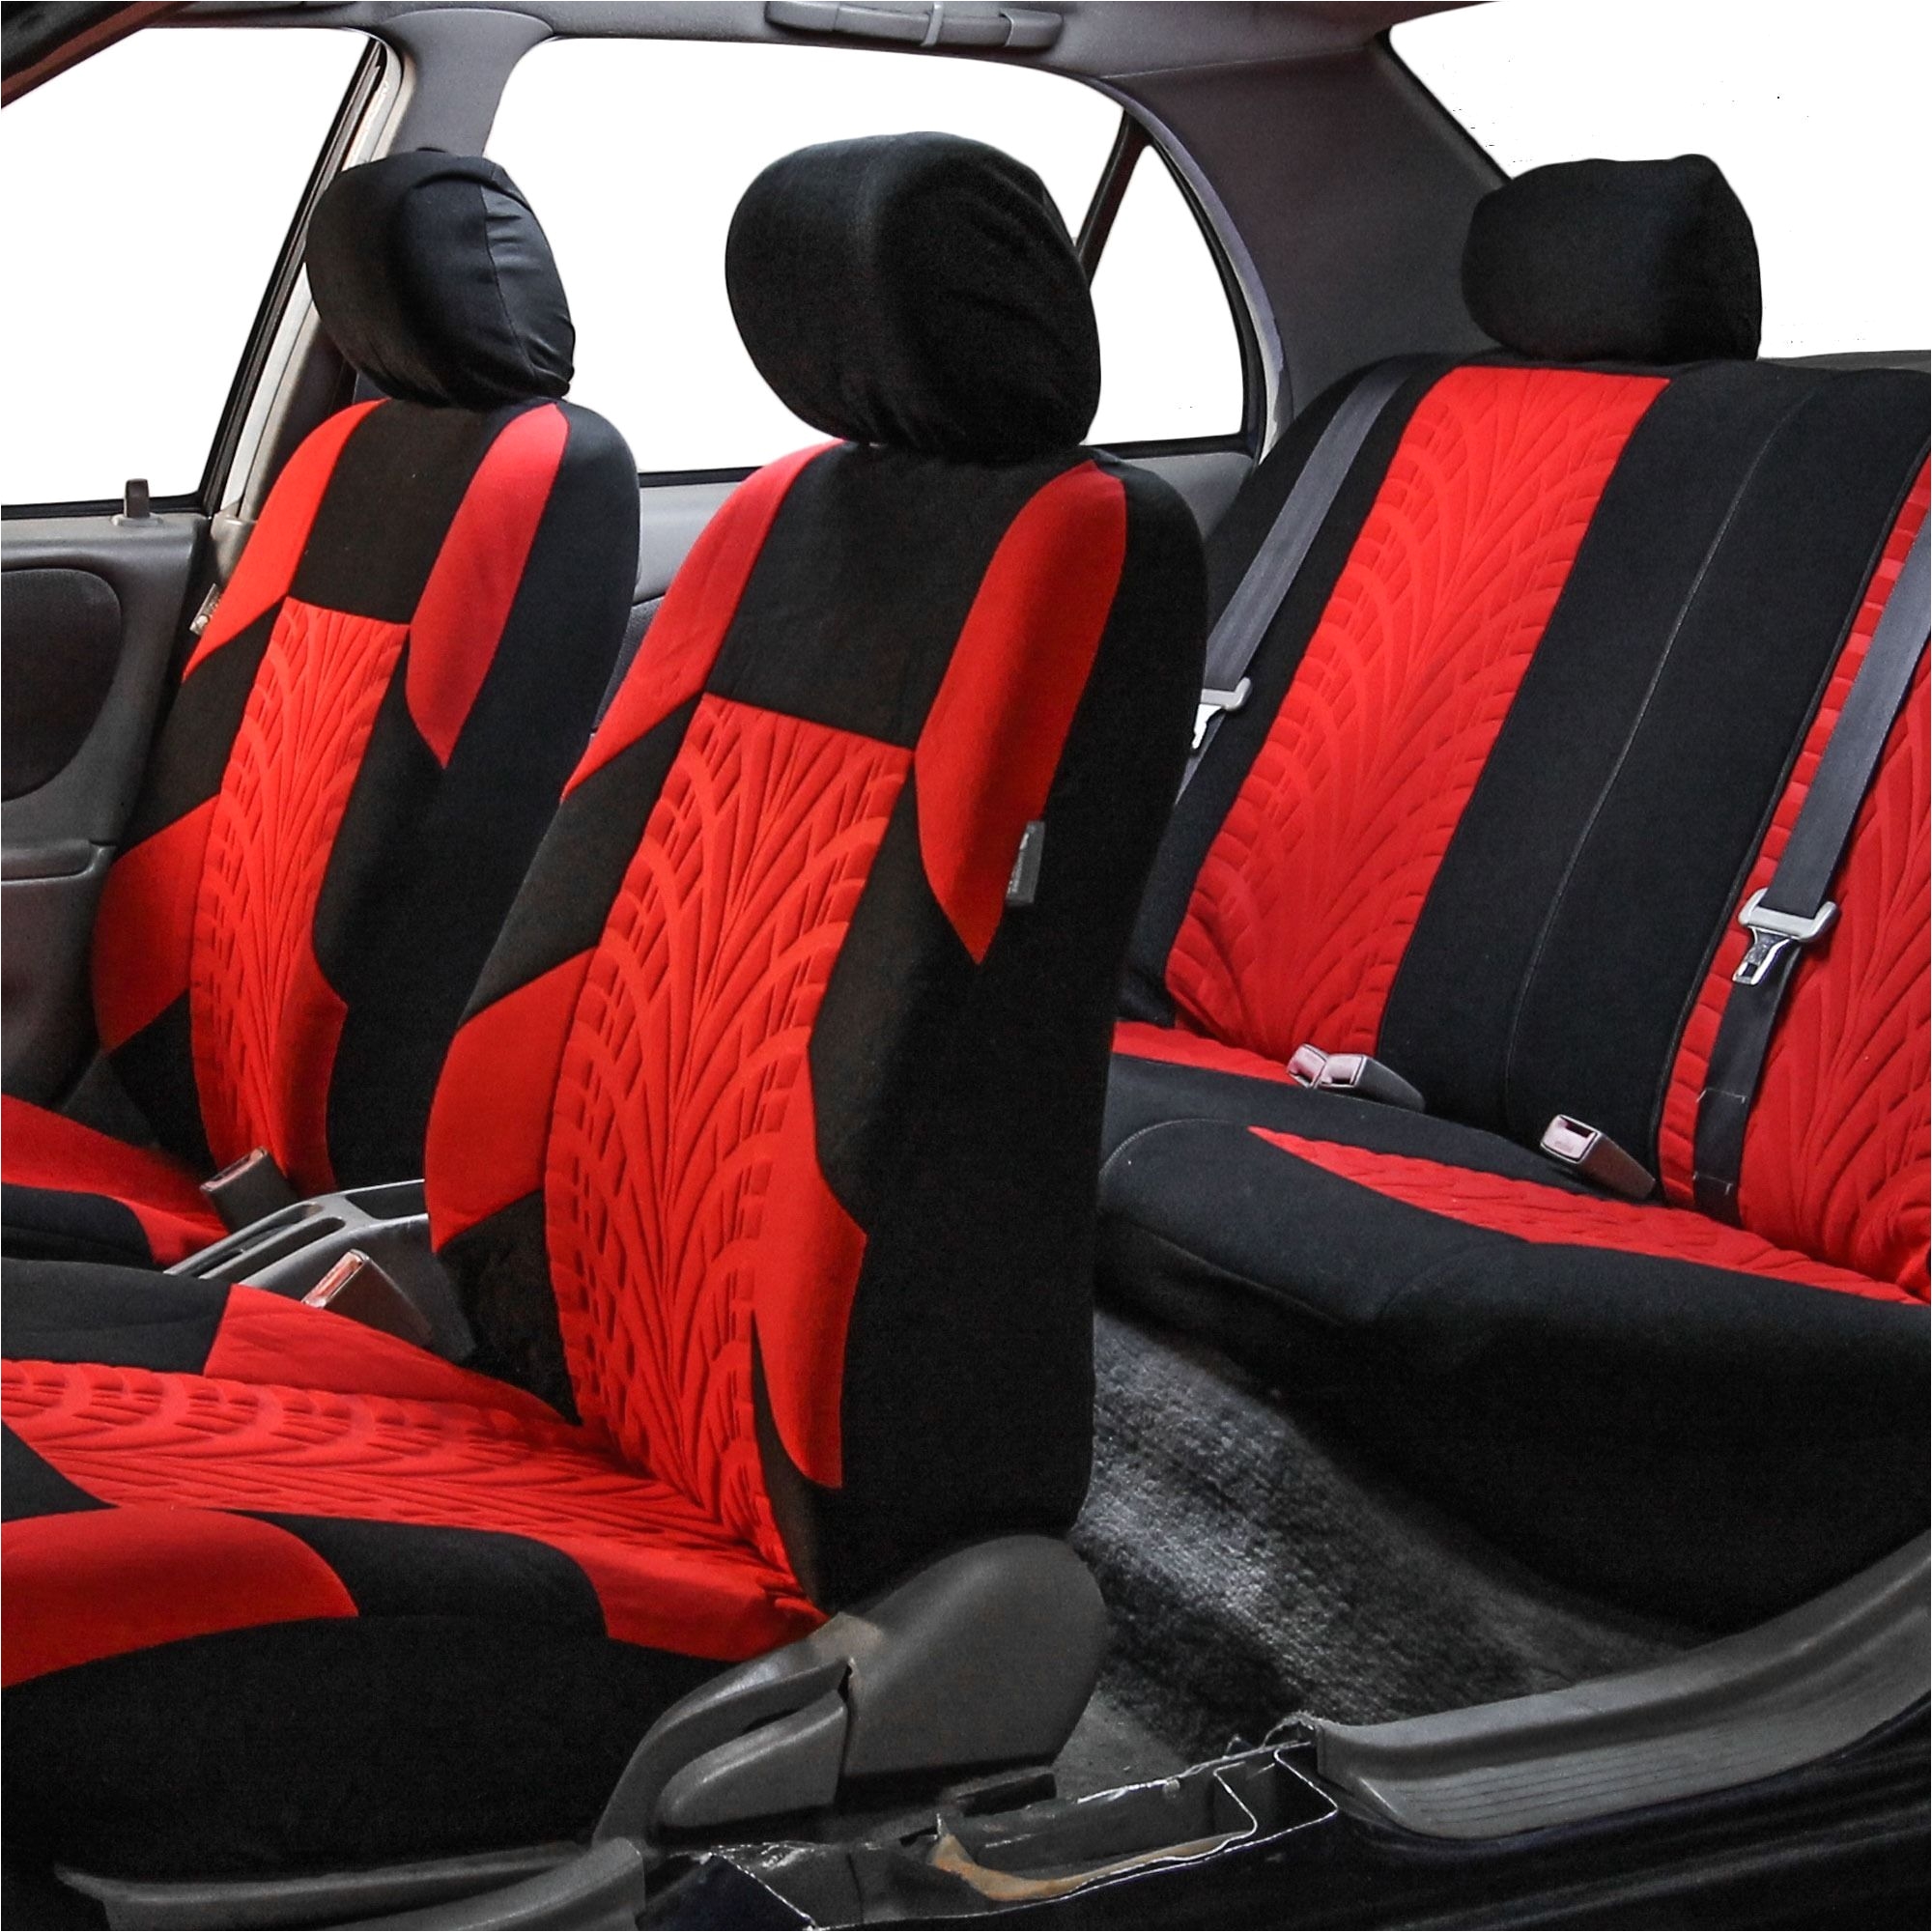 fh group red and black travel master car seat covers red black